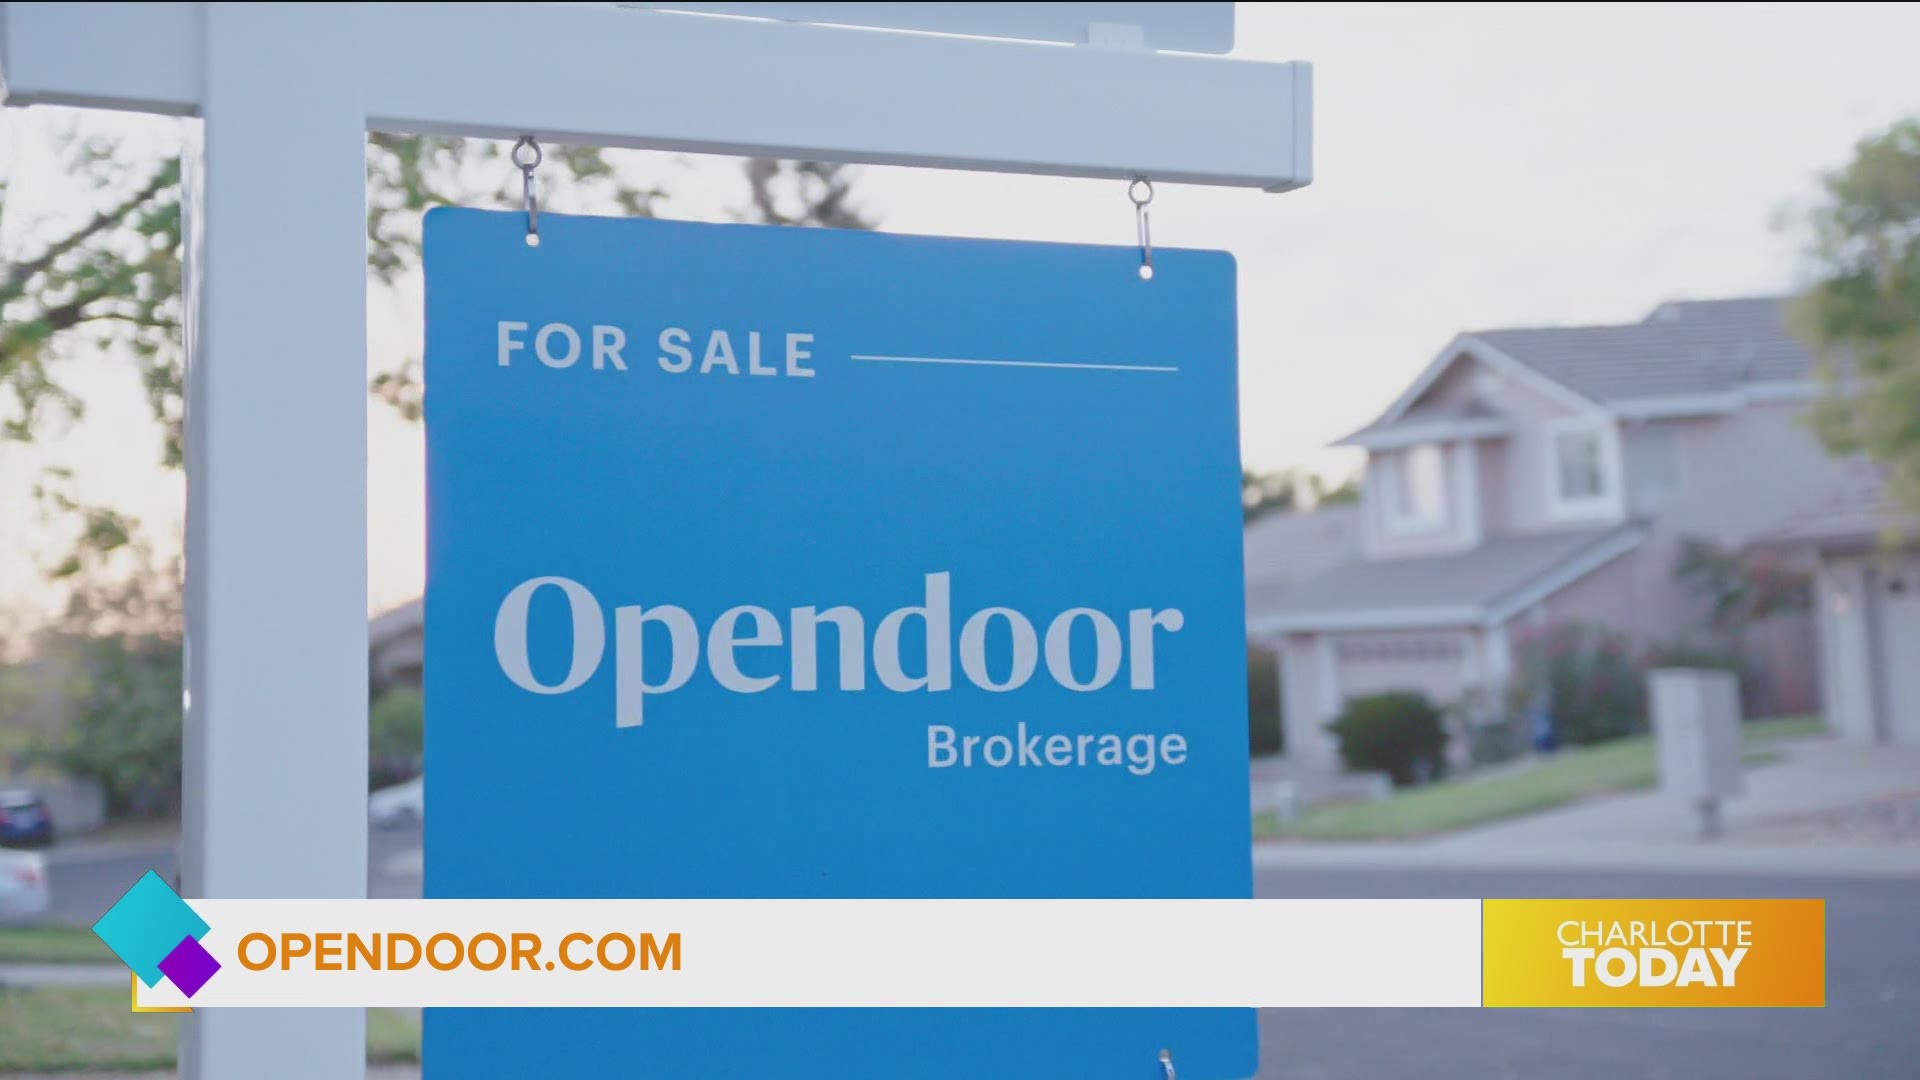 After a few easy steps, Opendoor delivers a cash offer straight to you